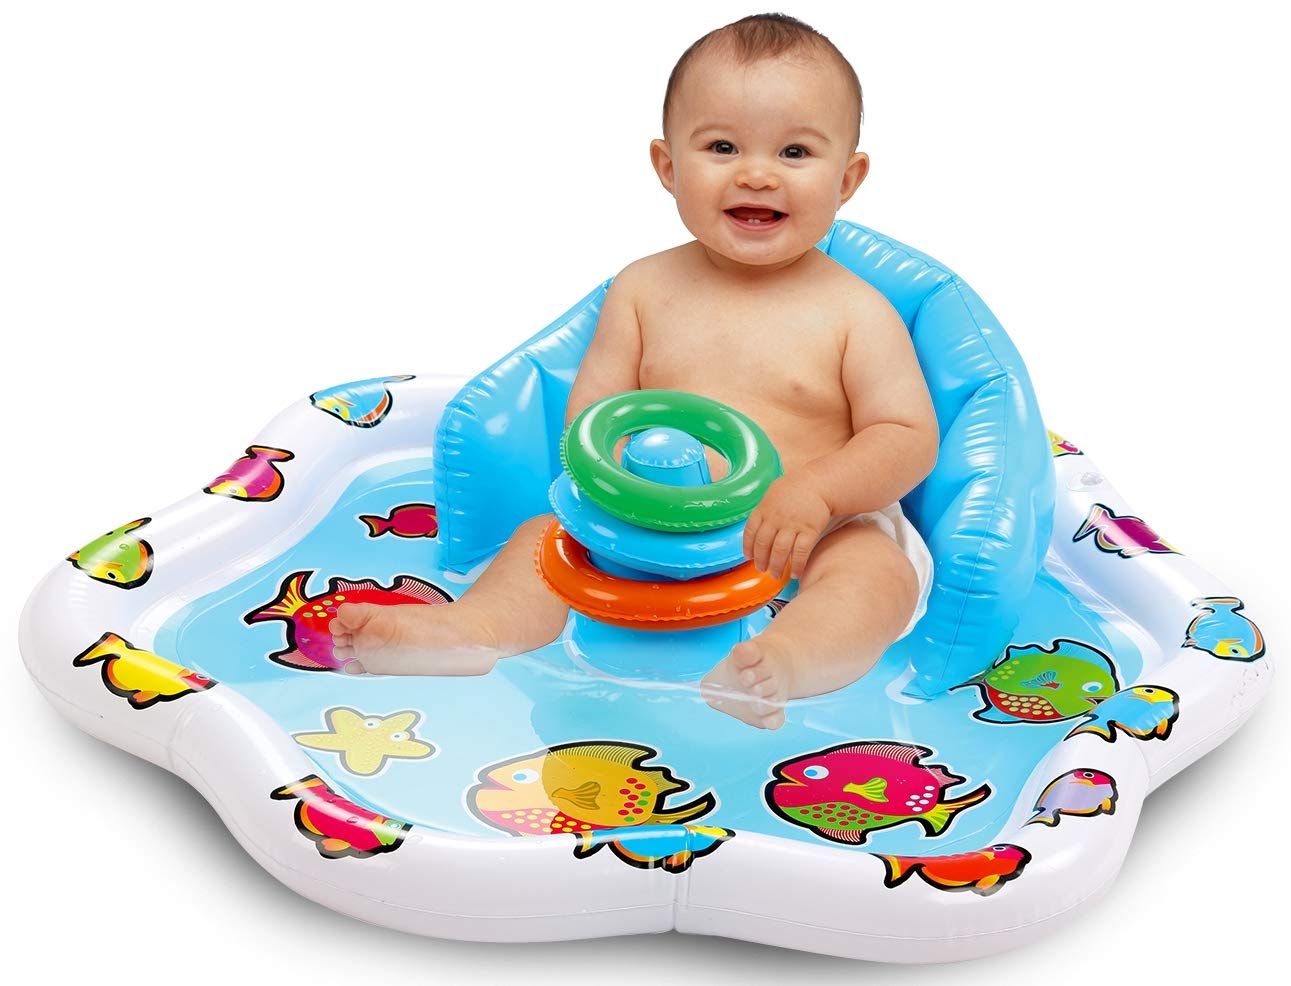 Bundaloo Infant Pool Splash Mat Inflatable with Backrest & Stackable Ring Toys | Summer Fun Activity for Baby Toddlers | Easy Setup  - Like New